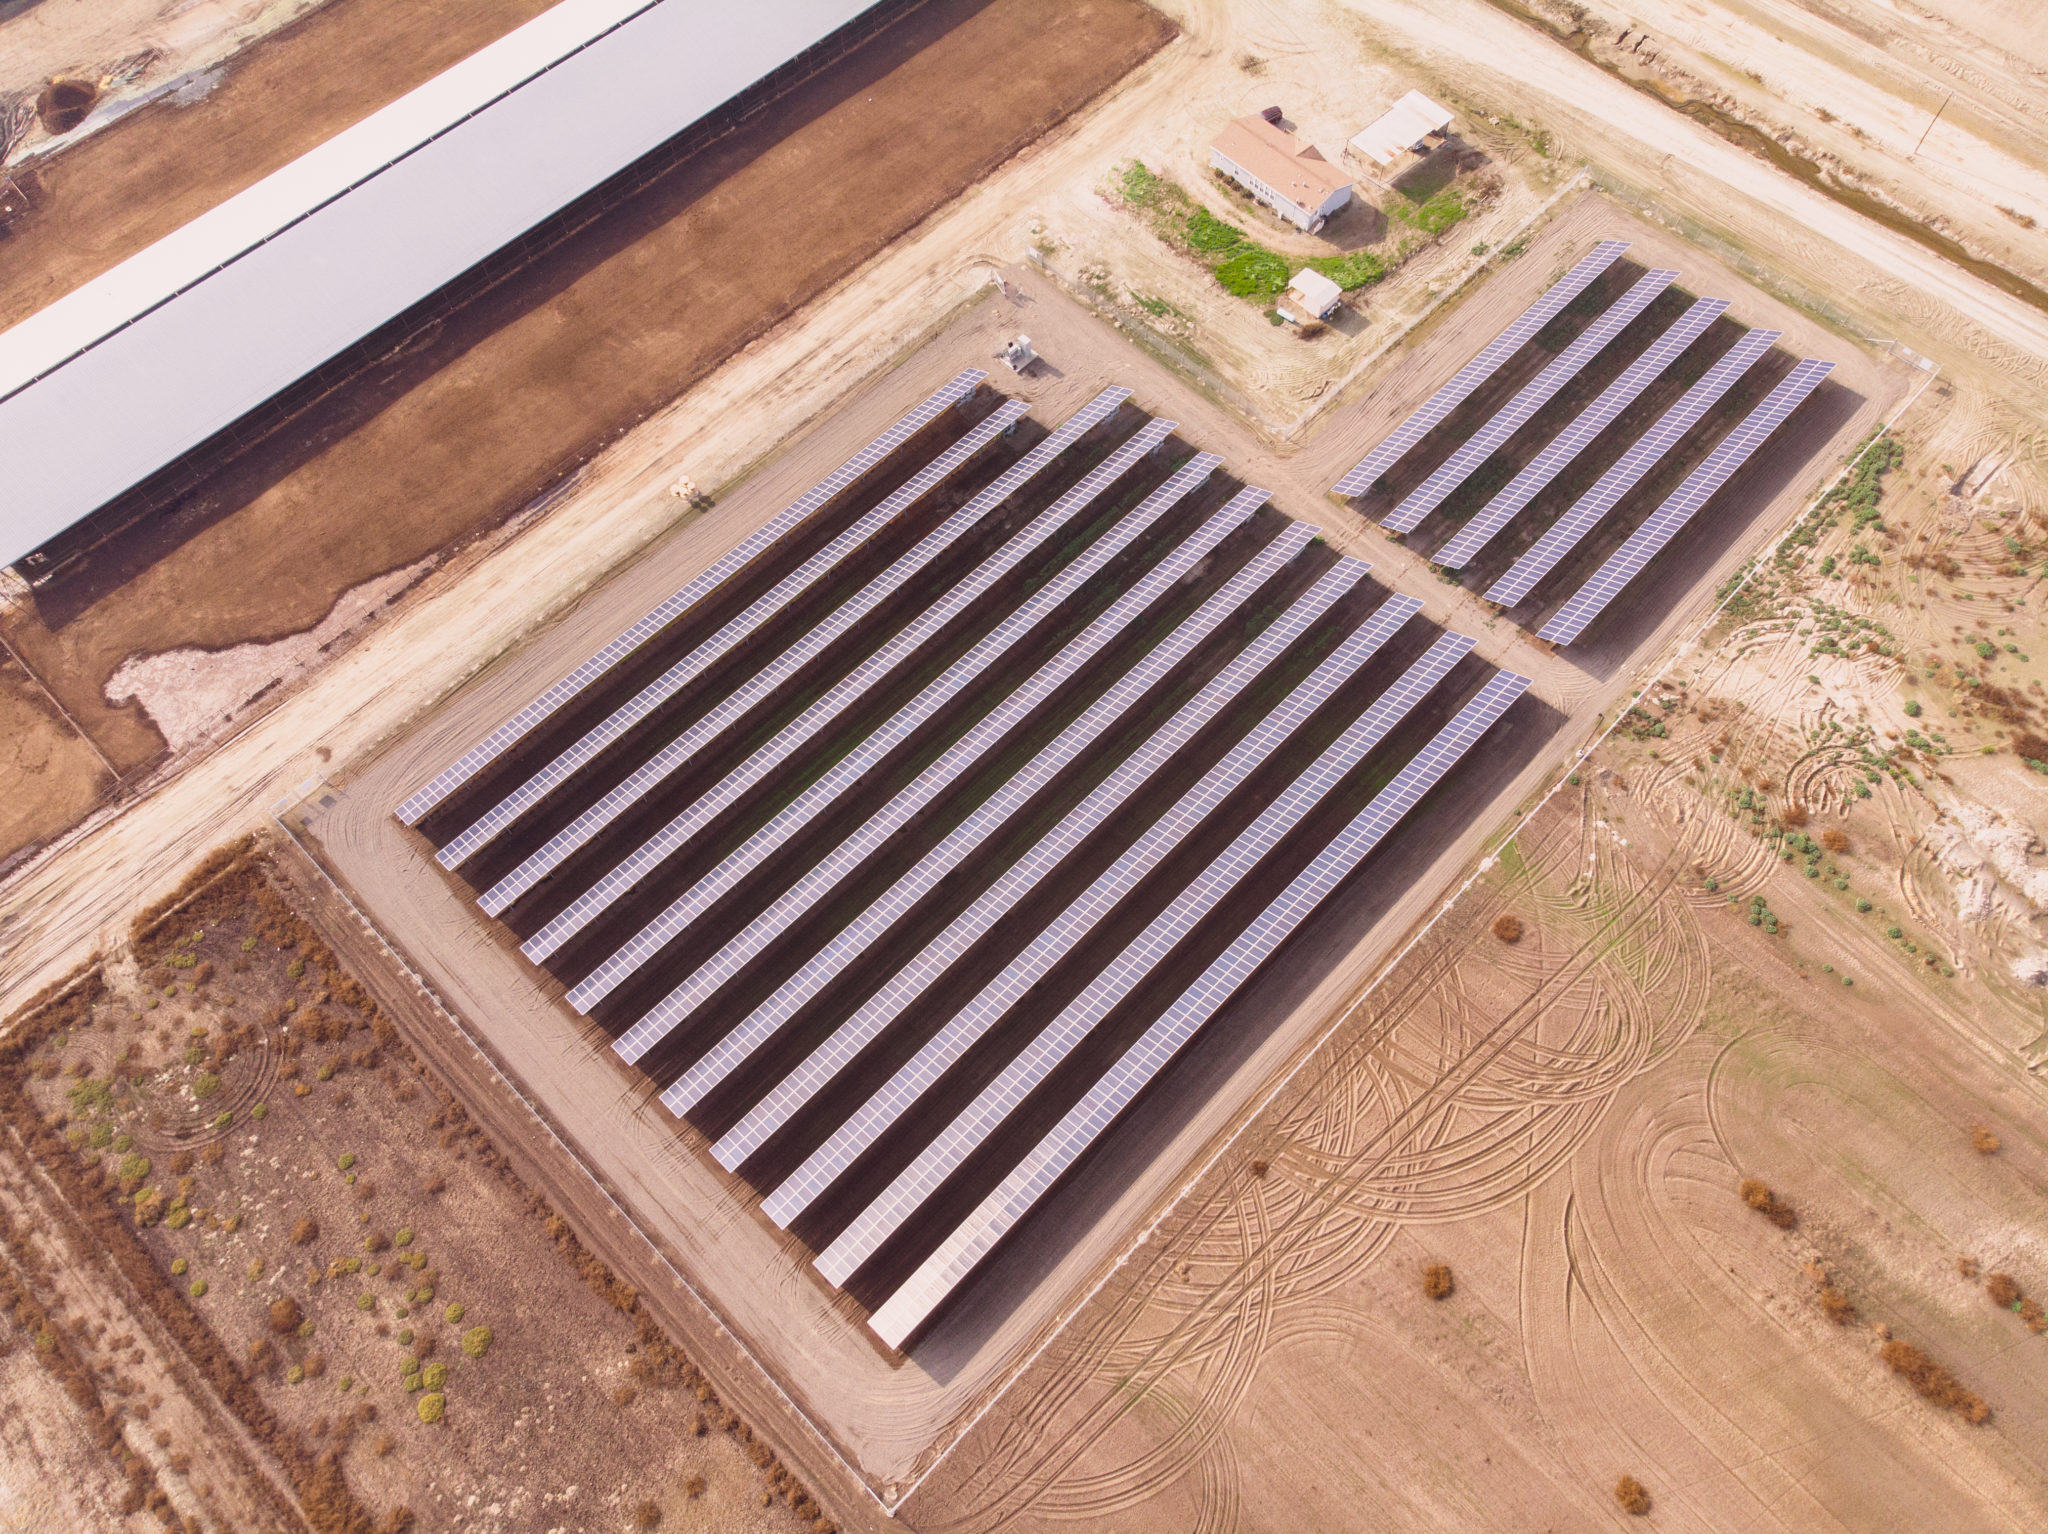 Aerial view of the solar installation surrounded by brown farmland at Lakeshore Dairy in Hanford, California.